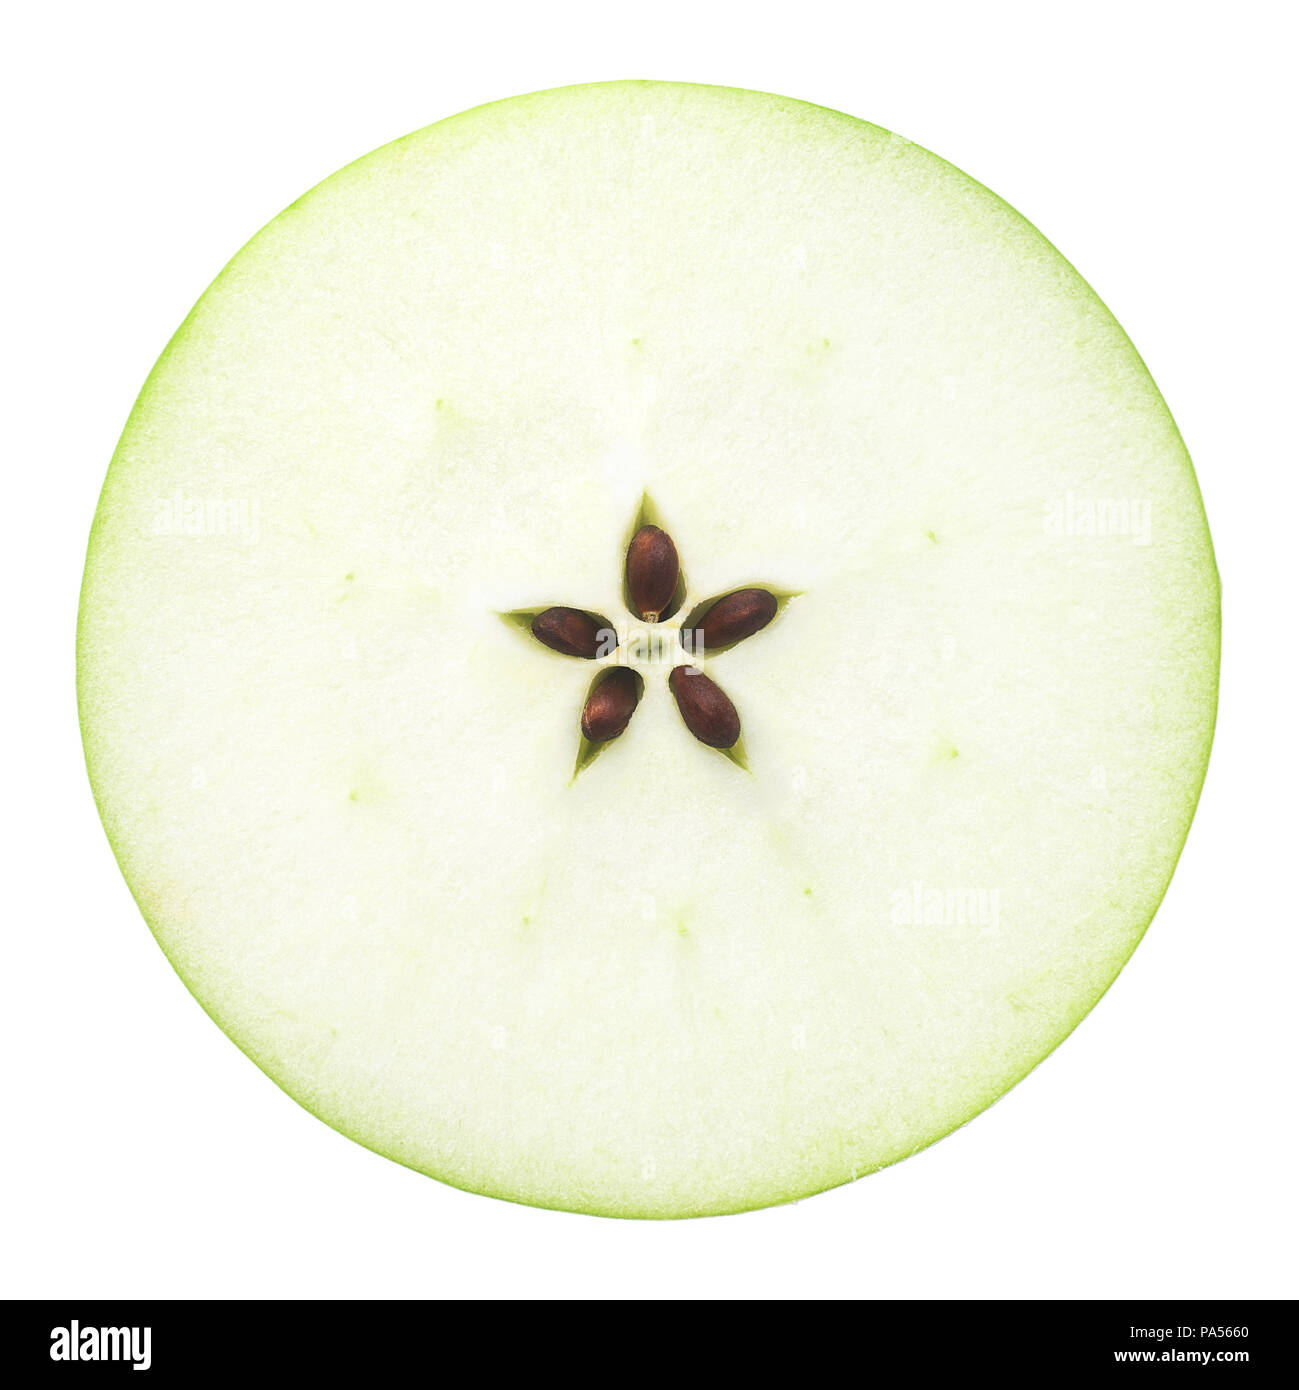 the cut apple in half, in the middle a seed, separately on a whi Stock Photo